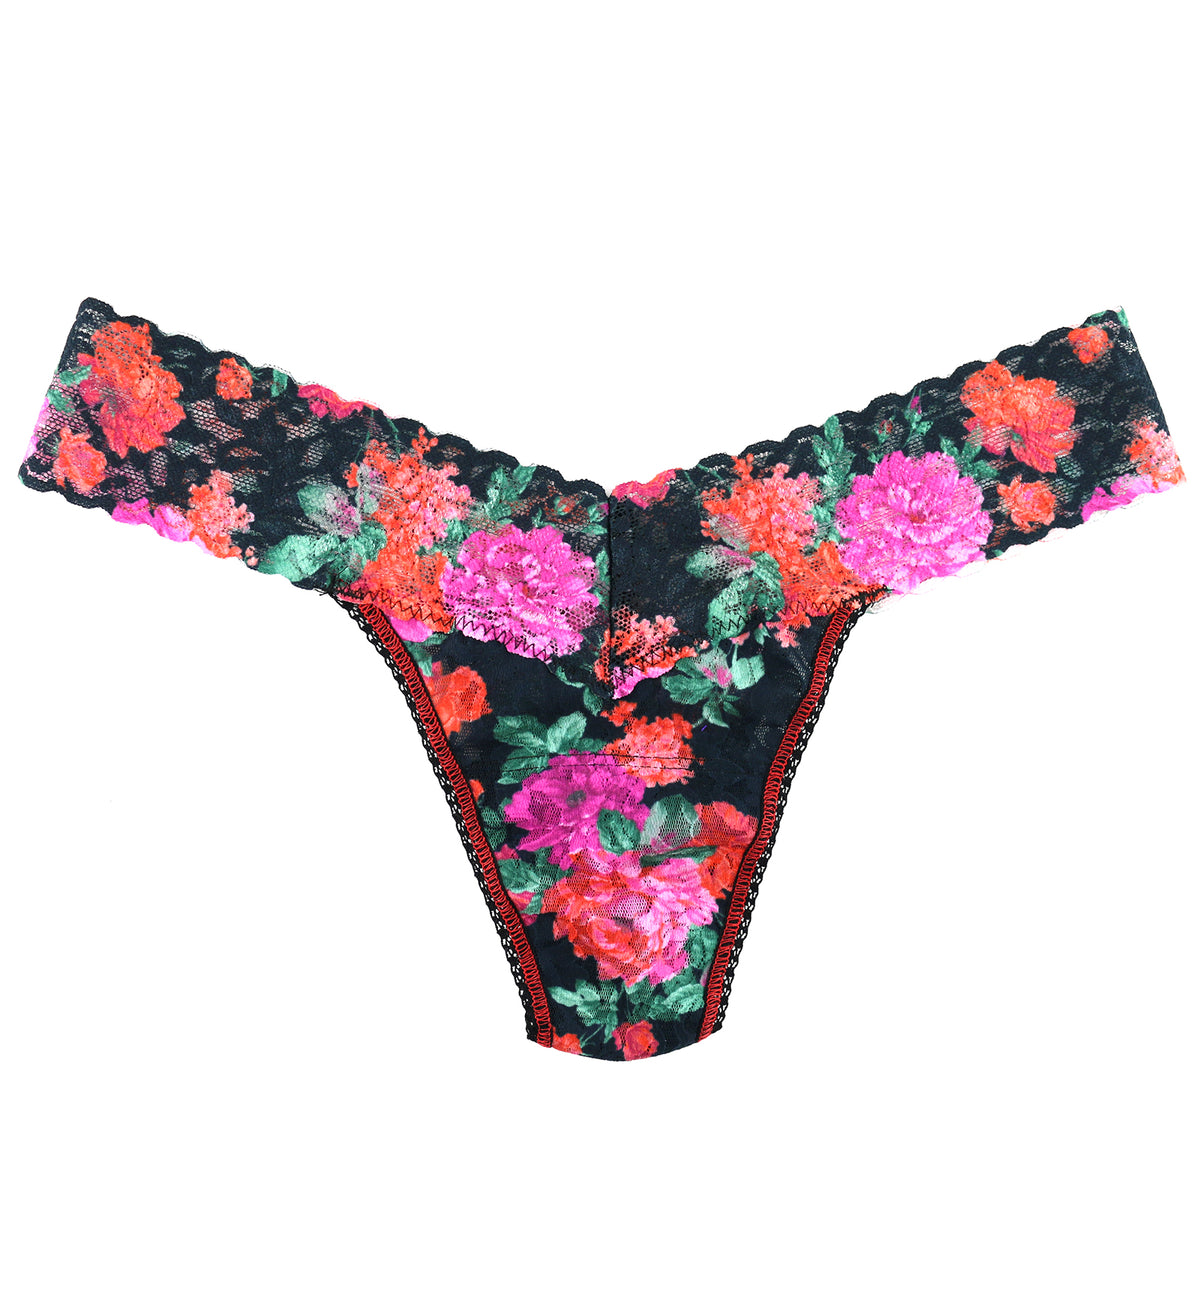 Hanky Panky Signature Lace Printed Low Rise Thong (PR4911P),Autobiography - Autobiography,One Size